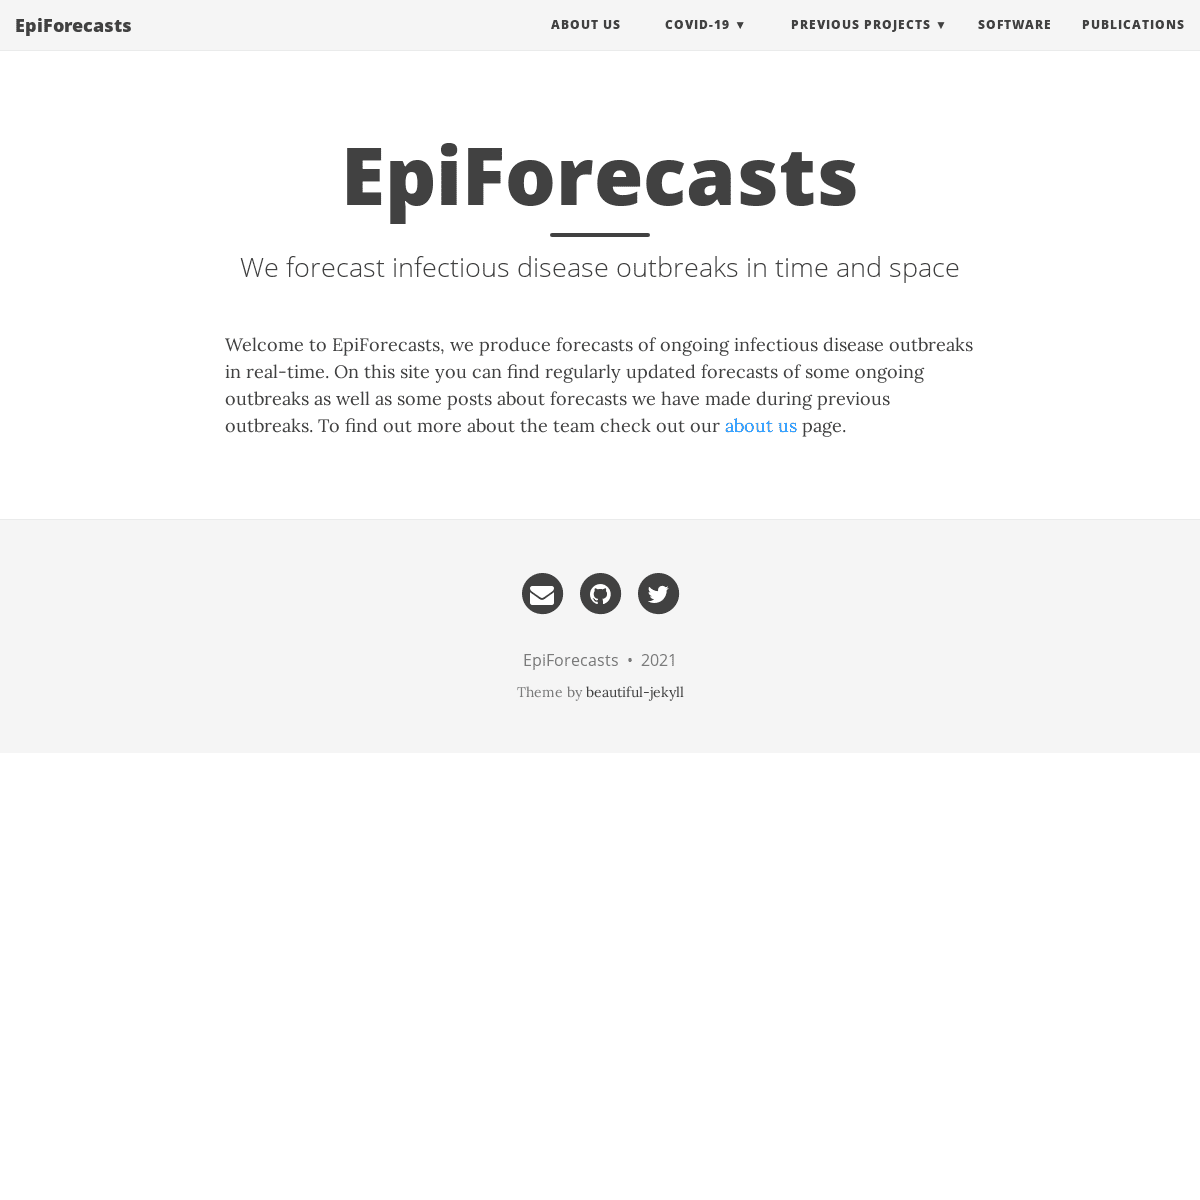 A complete backup of https://epiforecasts.io